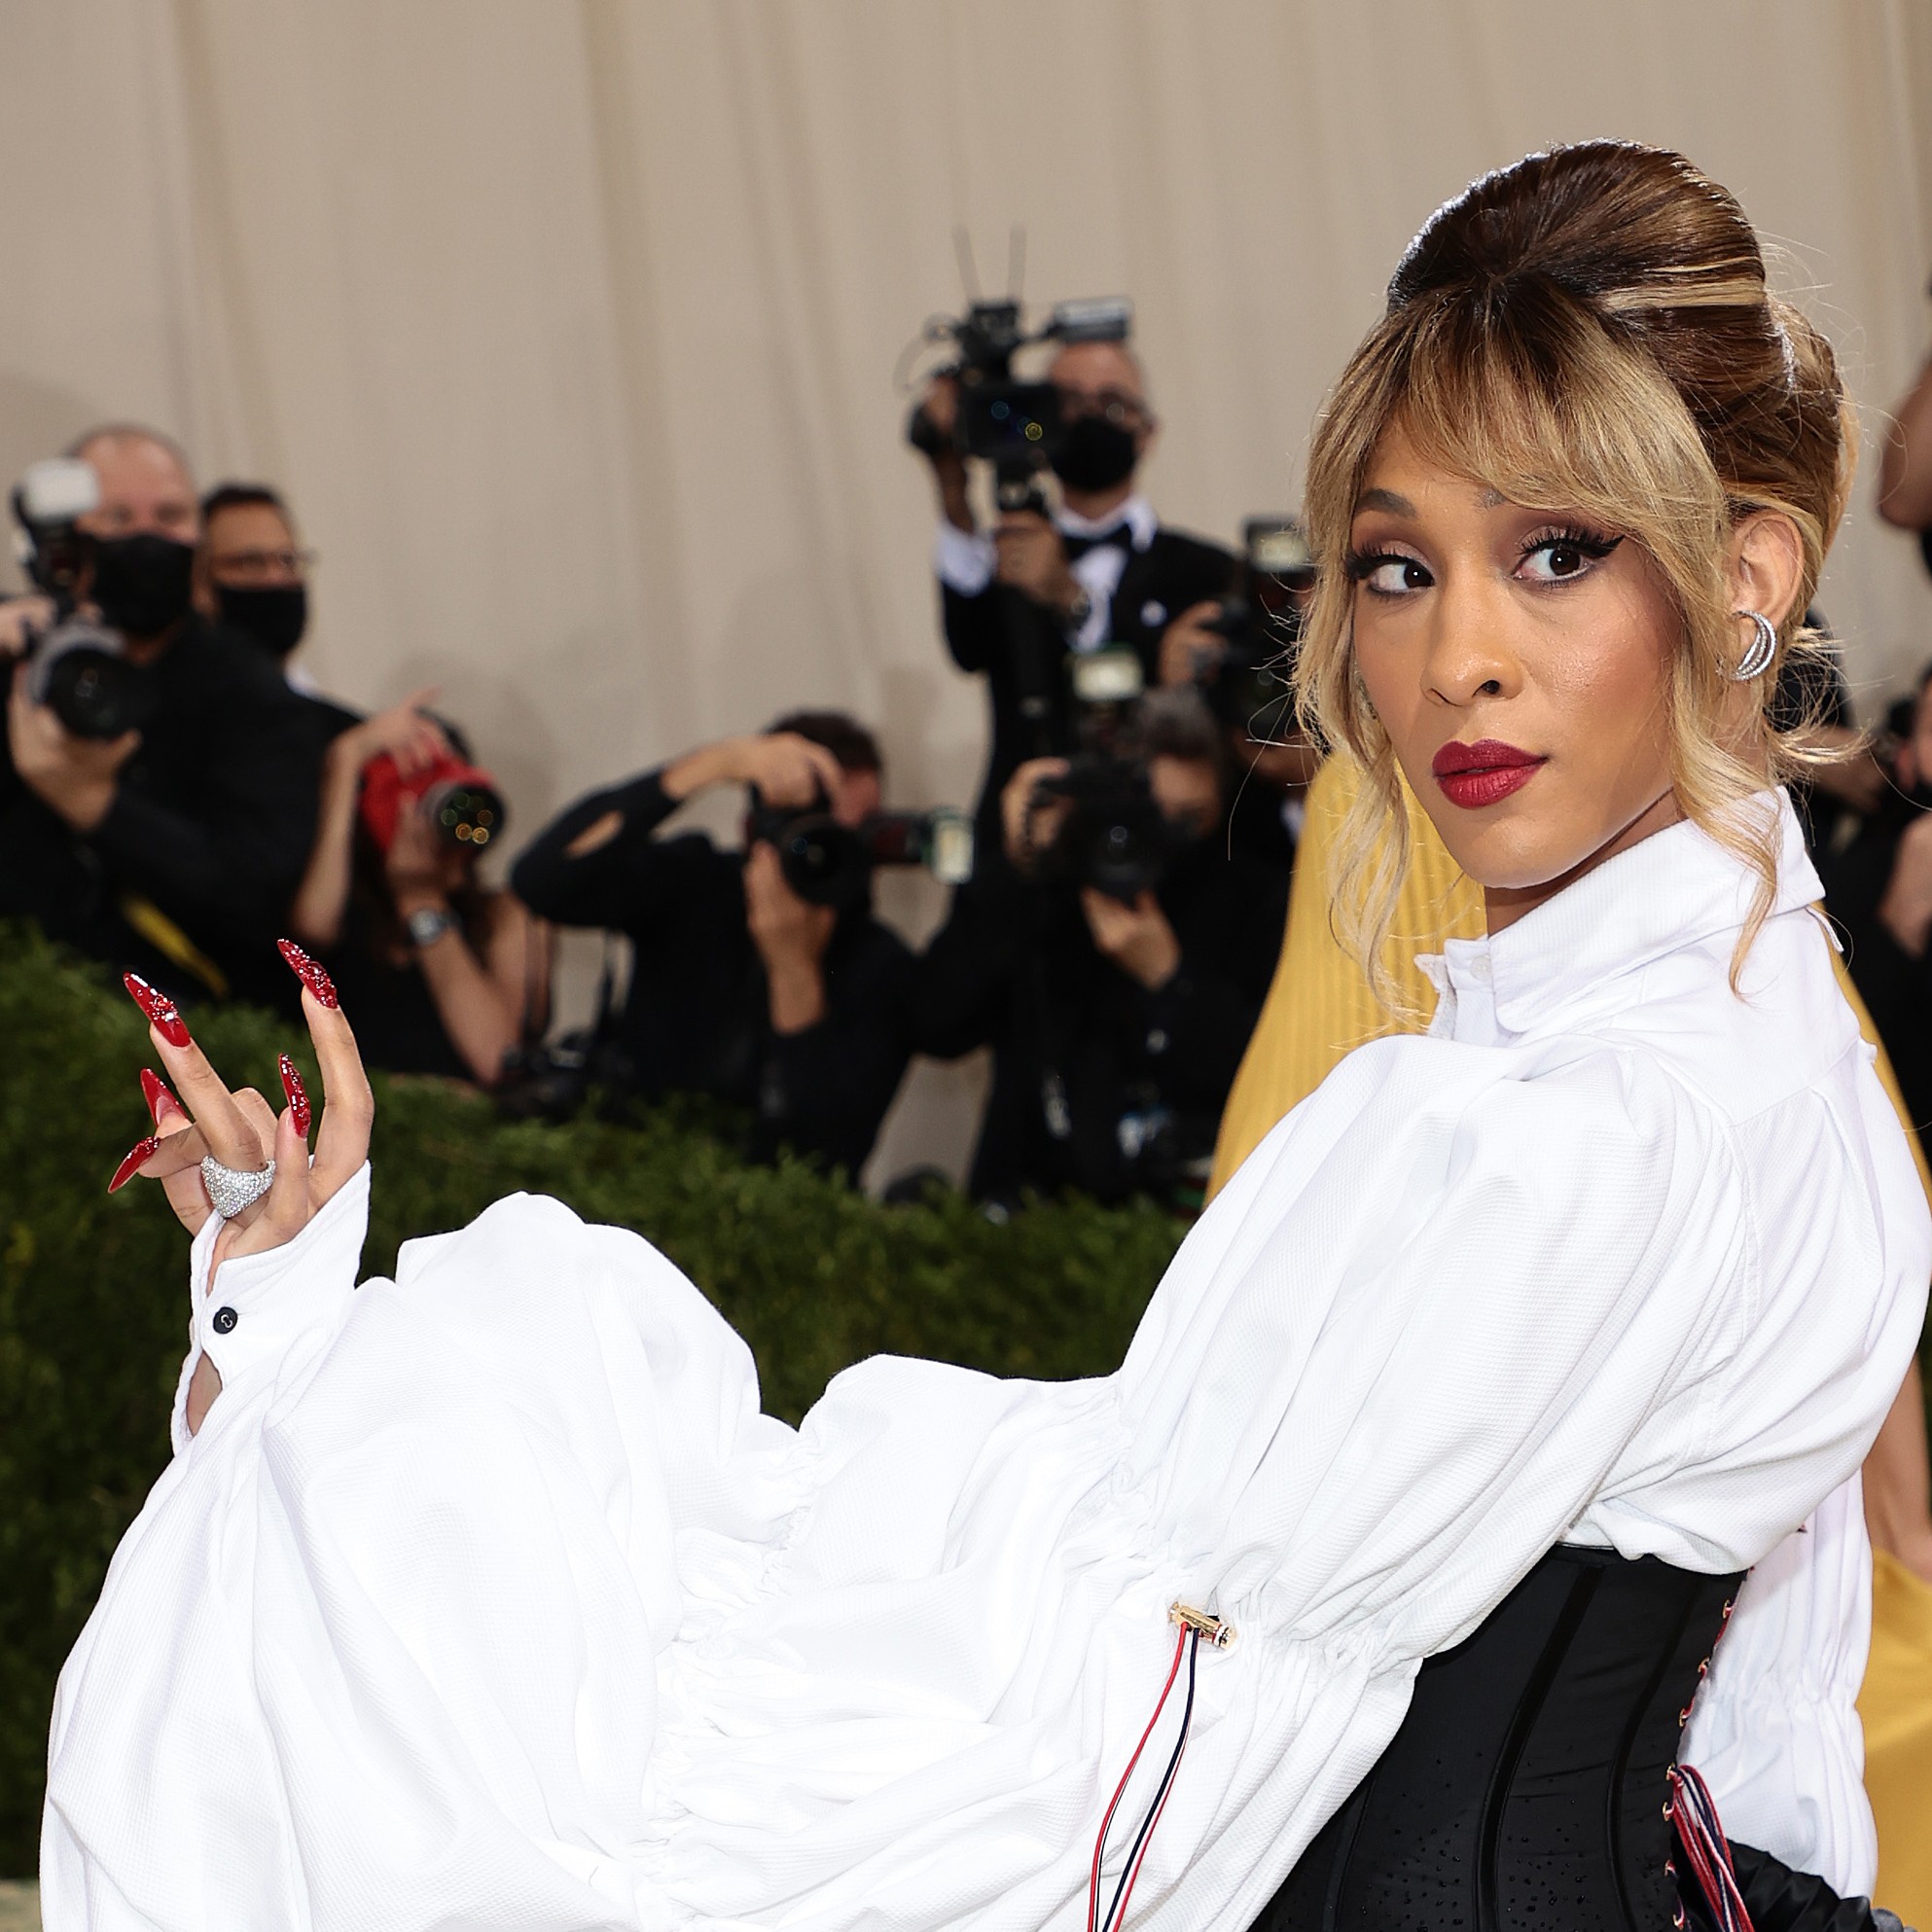 NEW YORK, NEW YORK - SEPTEMBER 13: Mj Rodriguez attends The 2021 Met Gala Celebrating In America: A Lexicon Of Fashion at Metropolitan Museum of Art on September 13, 2021 in New York City. (Photo by Dimitrios Kambouris/Getty Images for The Met Museum/Vogu (Foto: Getty Images for The Met Museum/)